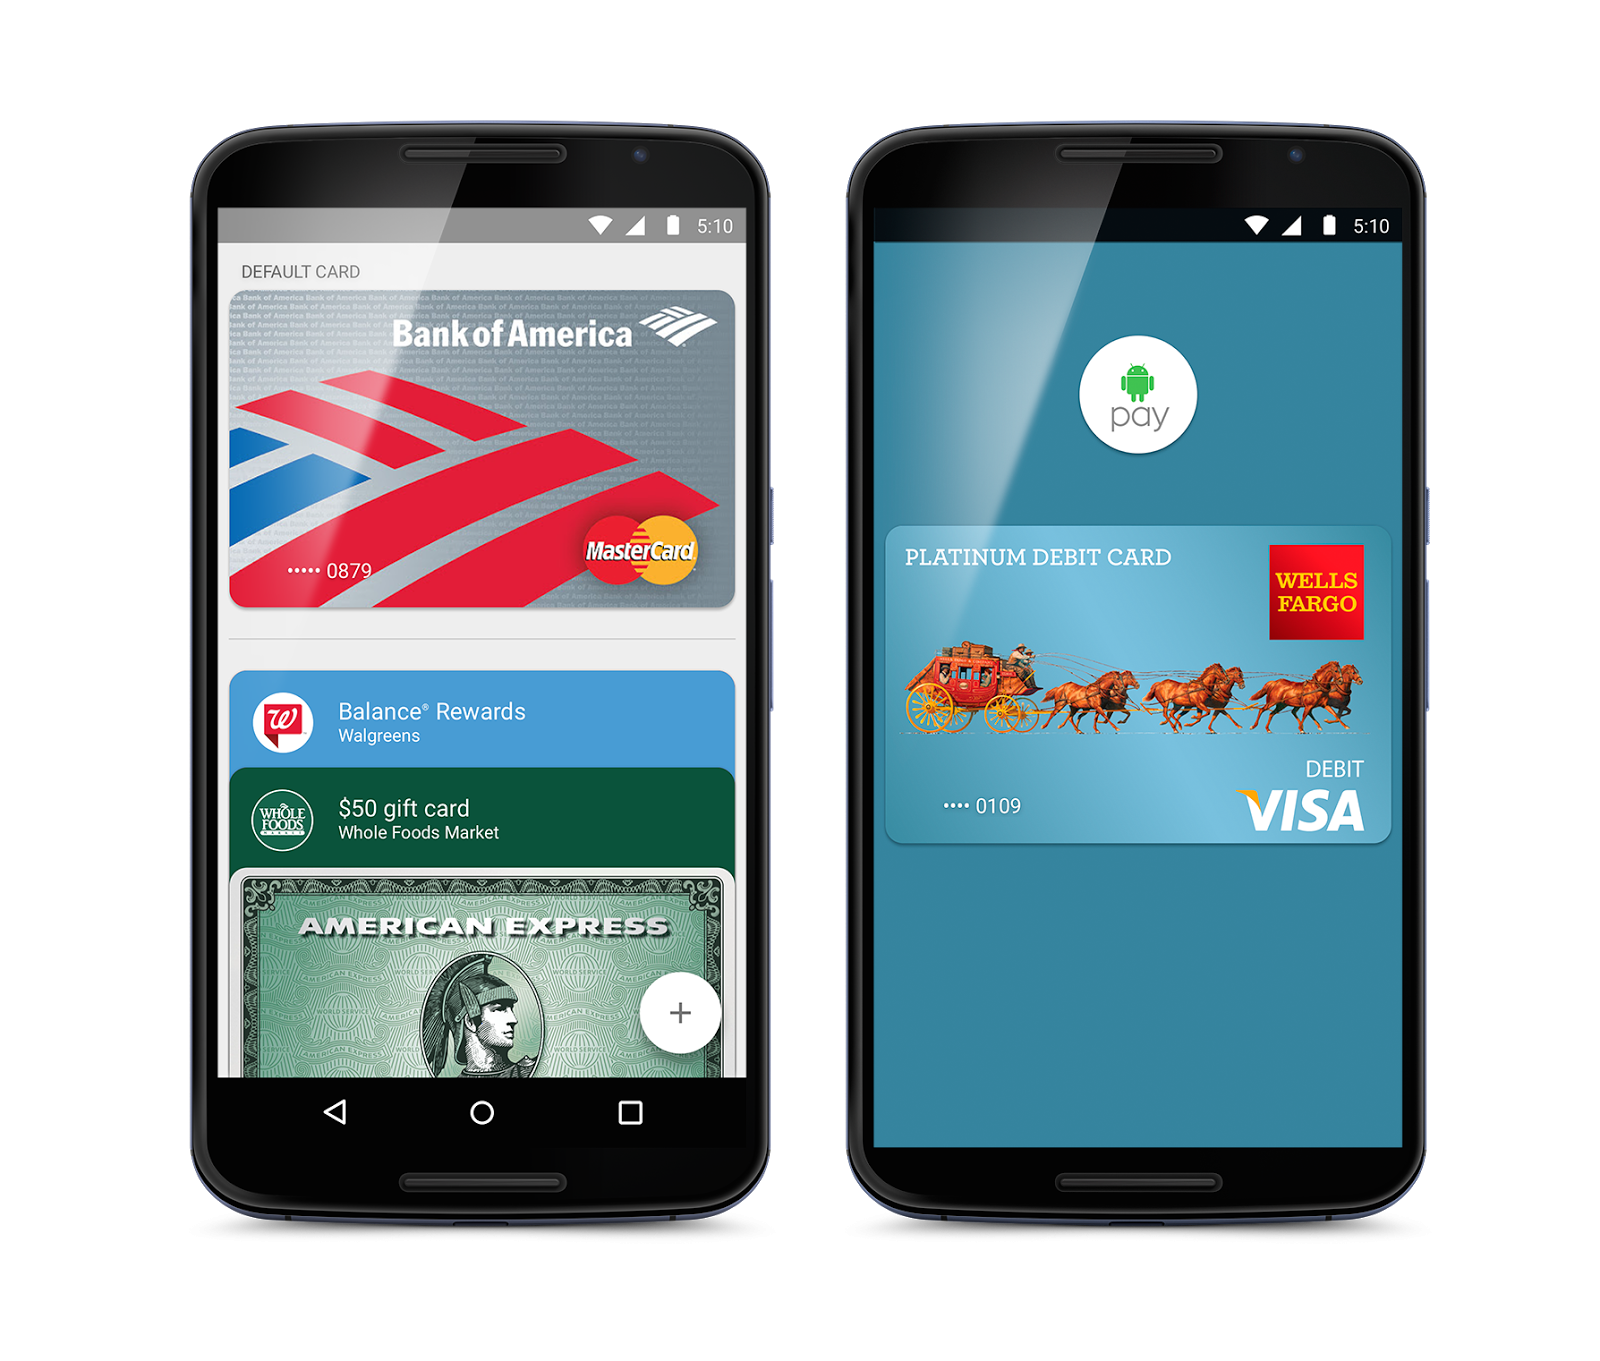 android-pay-takes-its-battle-against-apple-pay-to-the-u-k-image-cultofandroidcomwp-contentuploads201509Android-Pay-png